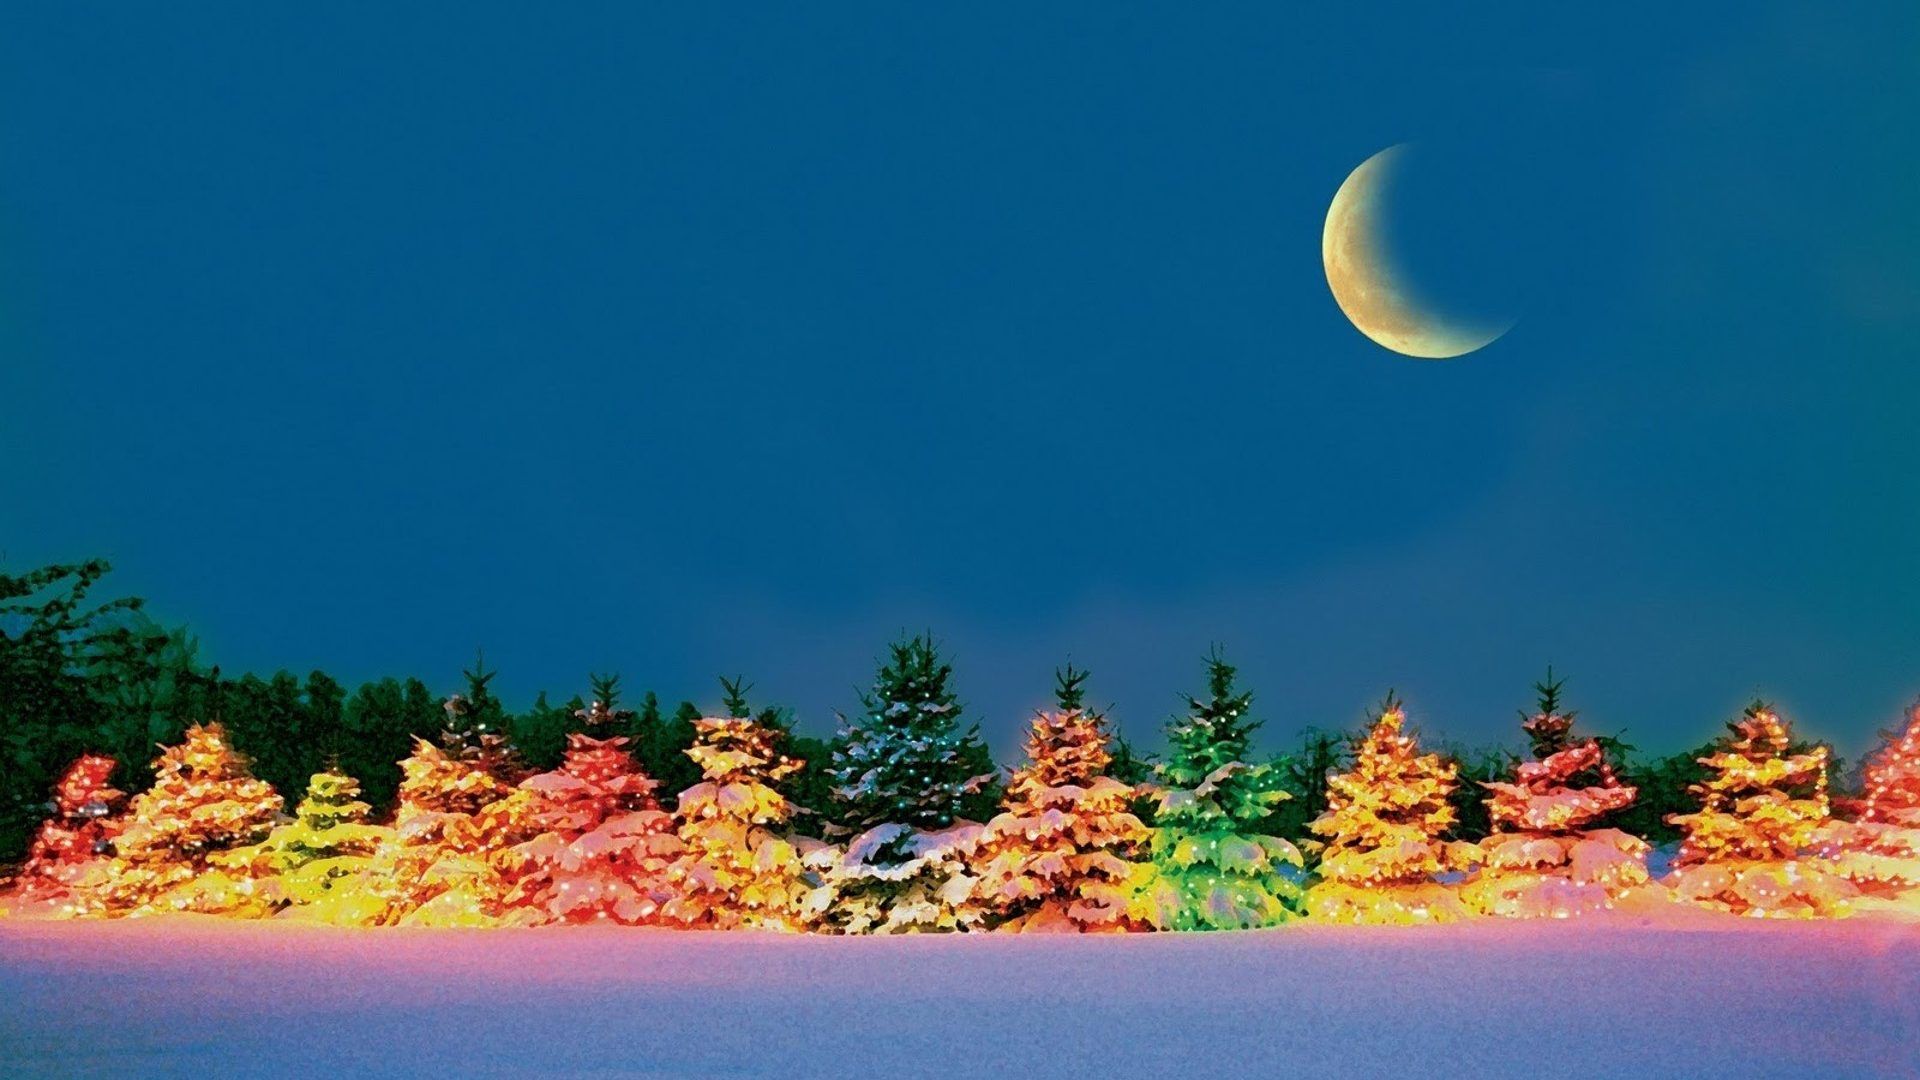 Winter Outdoor Christmas Trees Xtree Xmas New Year Colorful Photography Wonderful Winter Holidays Rivers Love Seasons Night Crescent Moon Festivals Attractions Dreams Wallpaper Hd 1920×1080